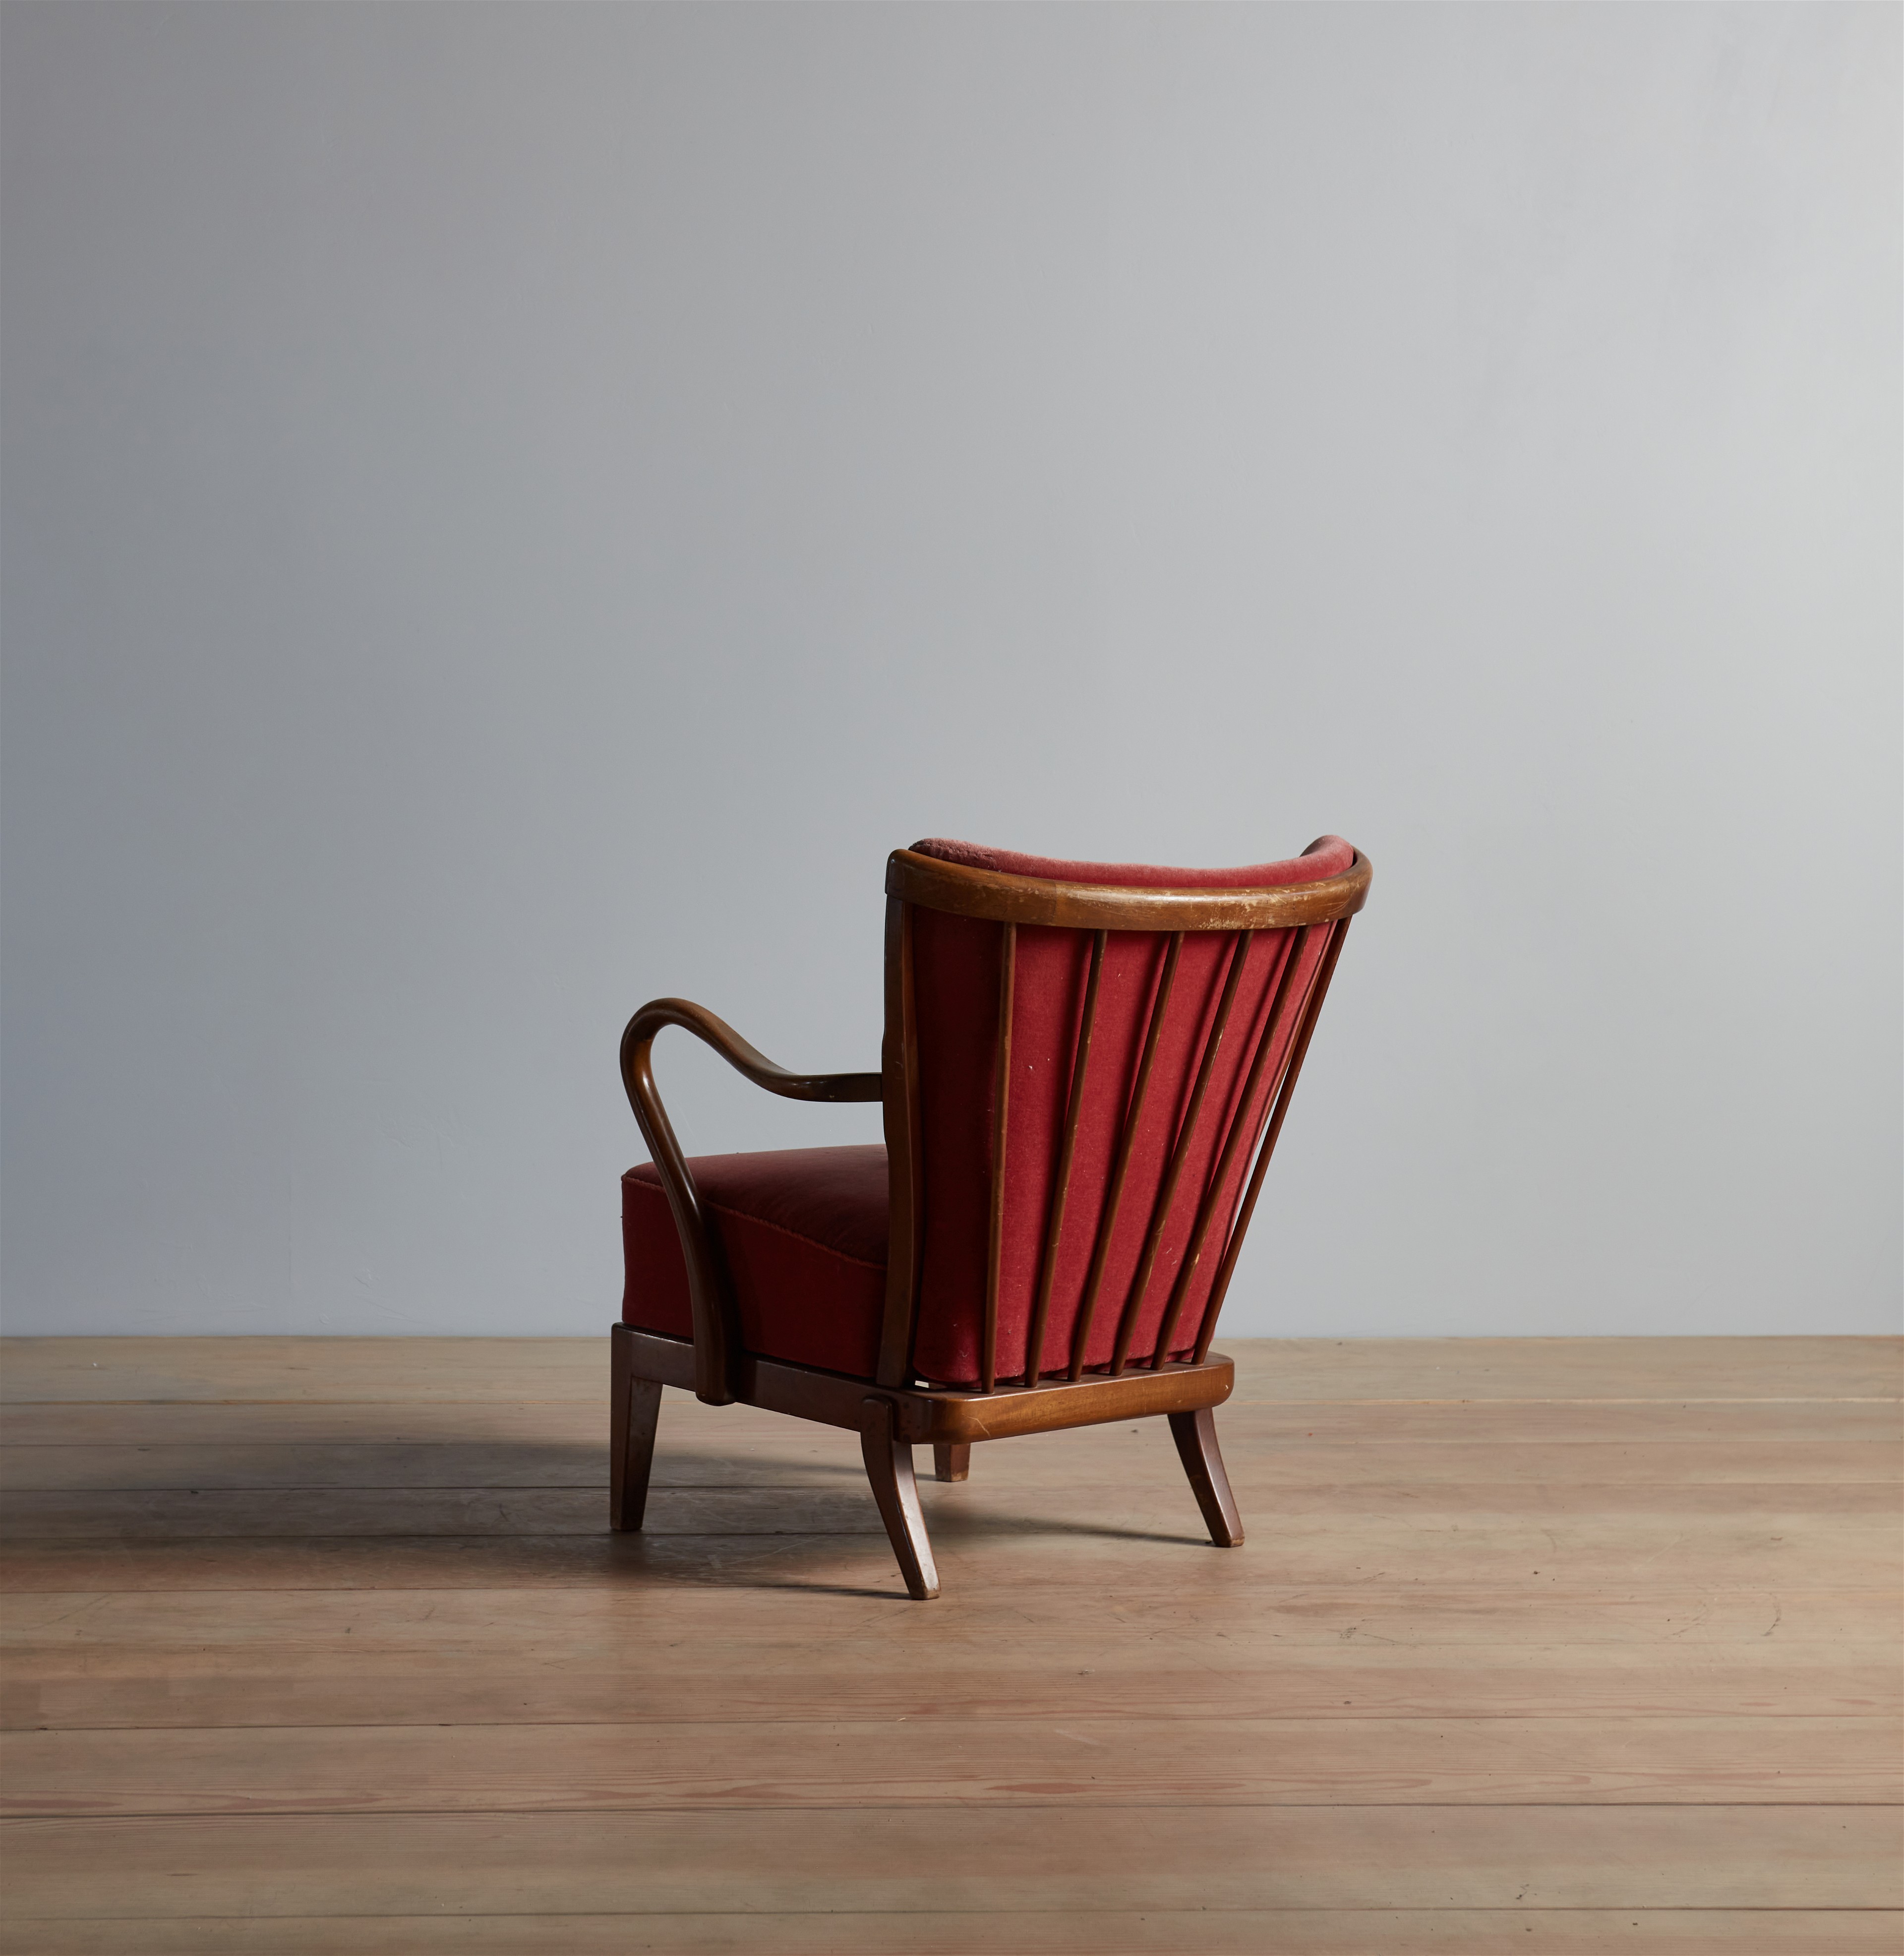 a red chair sitting on top of a wooden floor